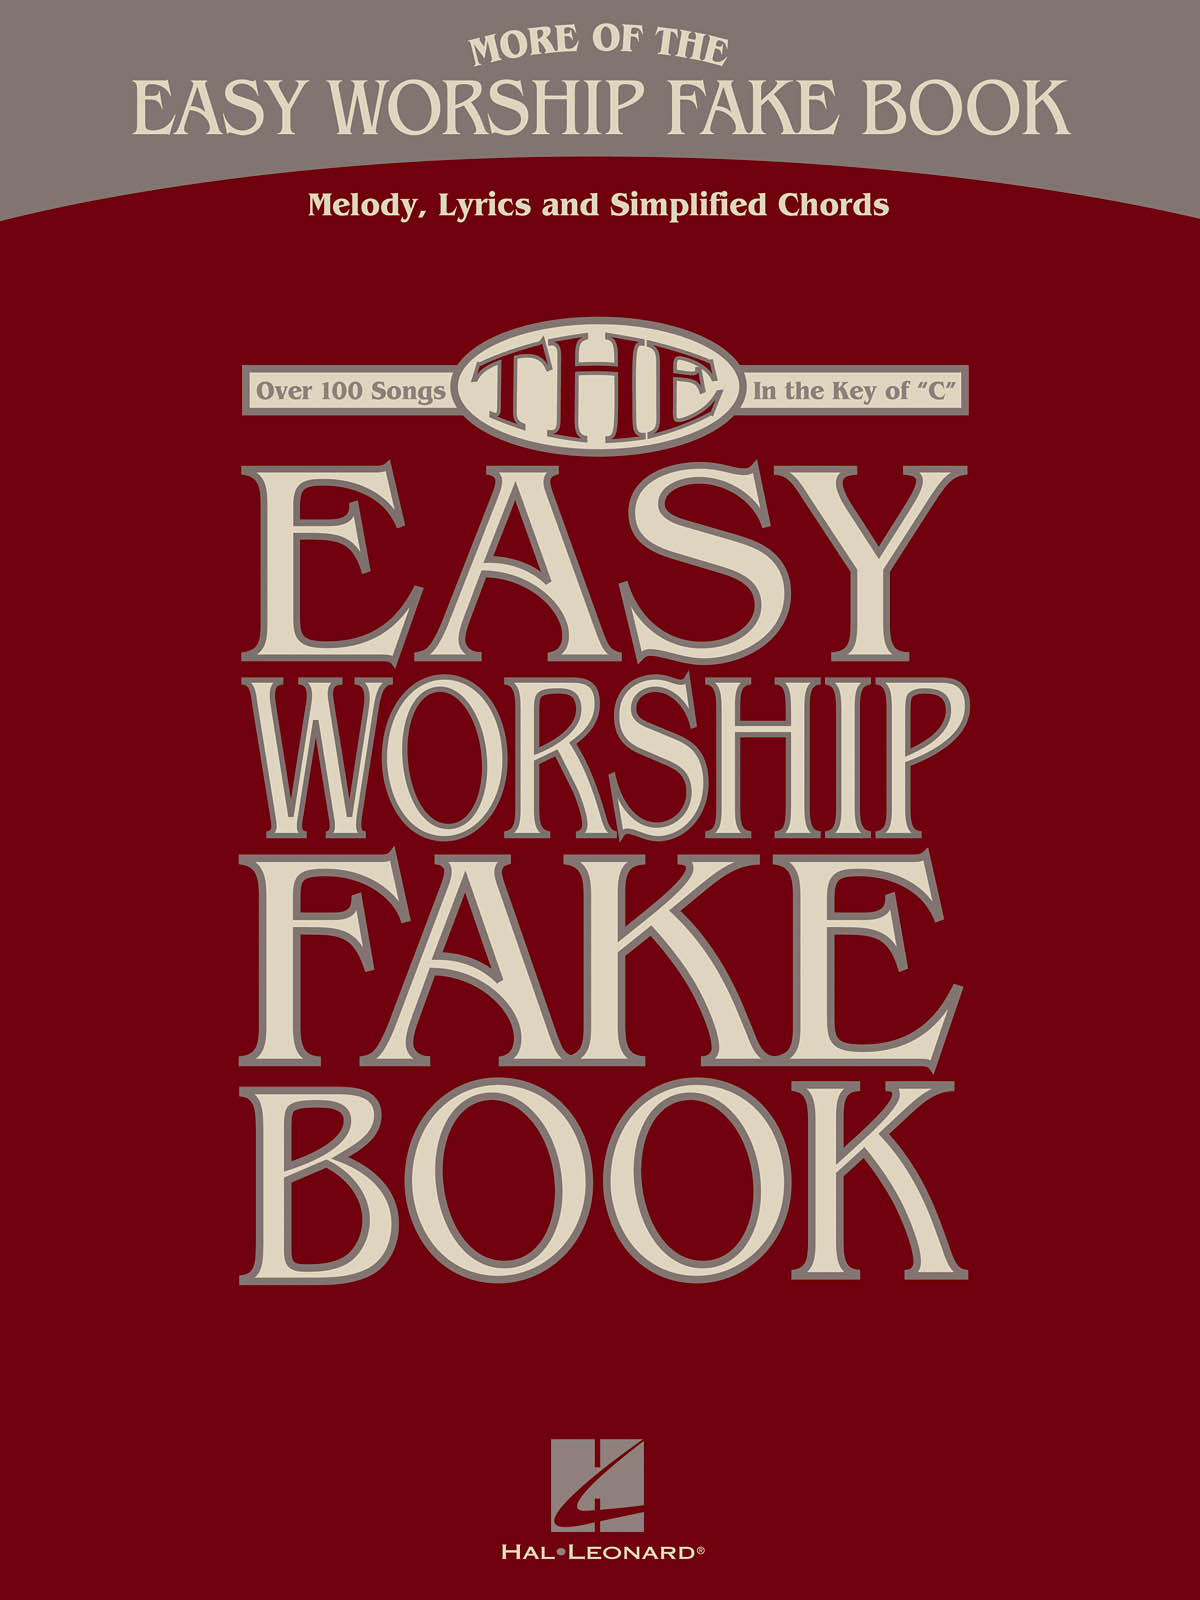 More of the Easy Worship Fake Book: Piano  Vocal and Guitar: Mixed Songbook